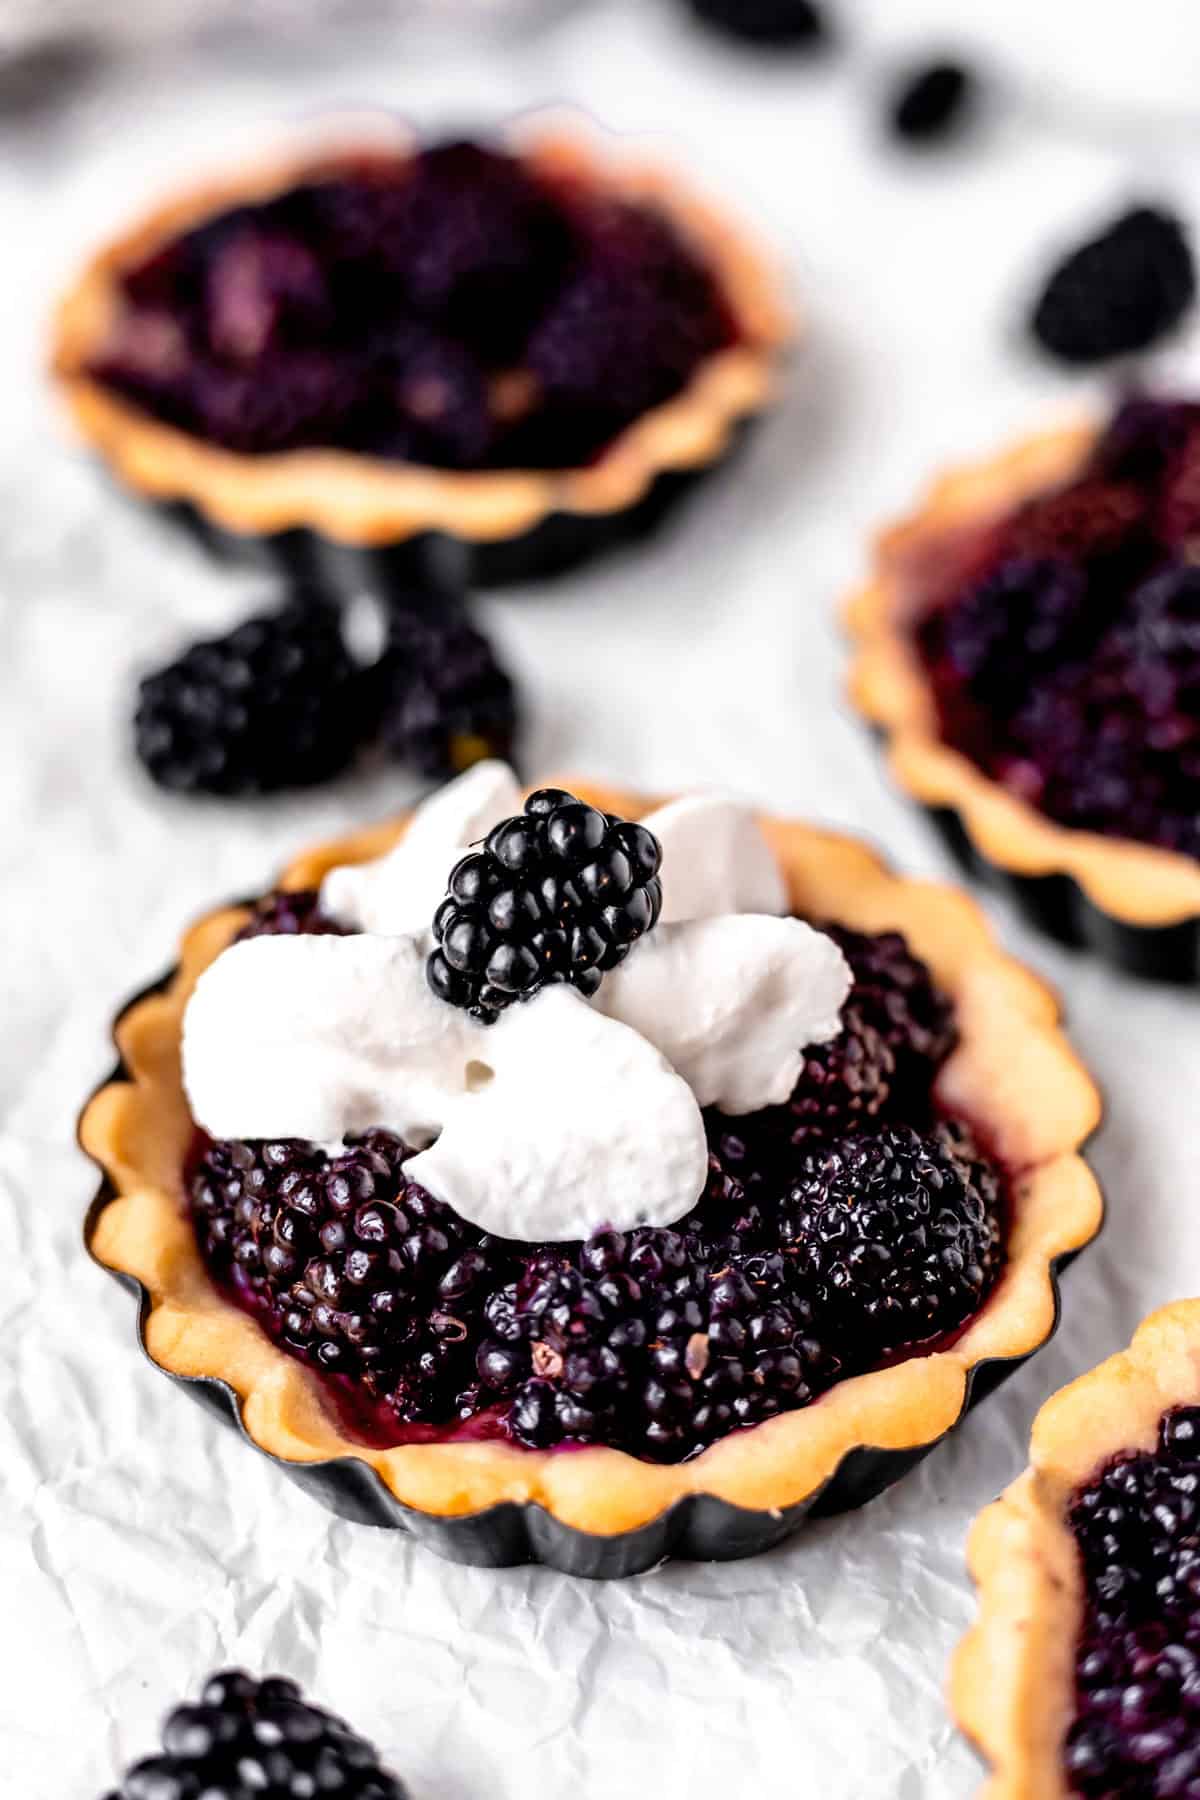 A blackberry tartlet topped with whipped cream and a blackberry with other mini tarts partially showing around it.